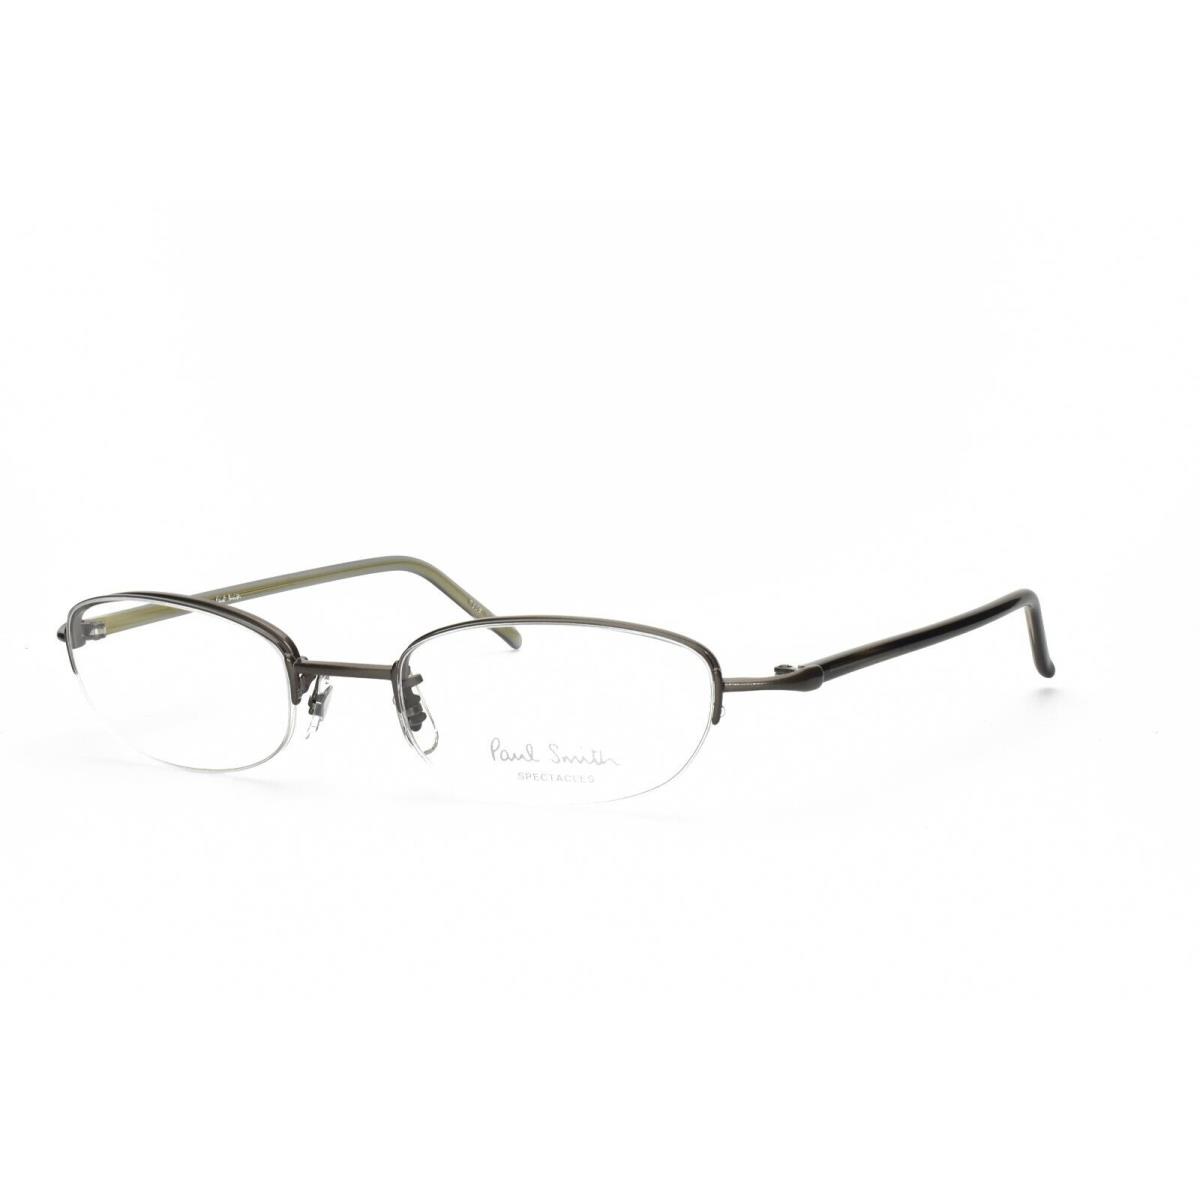 Paul Smith PS 131 FB Eyeglasses Frames Only 48-19-135